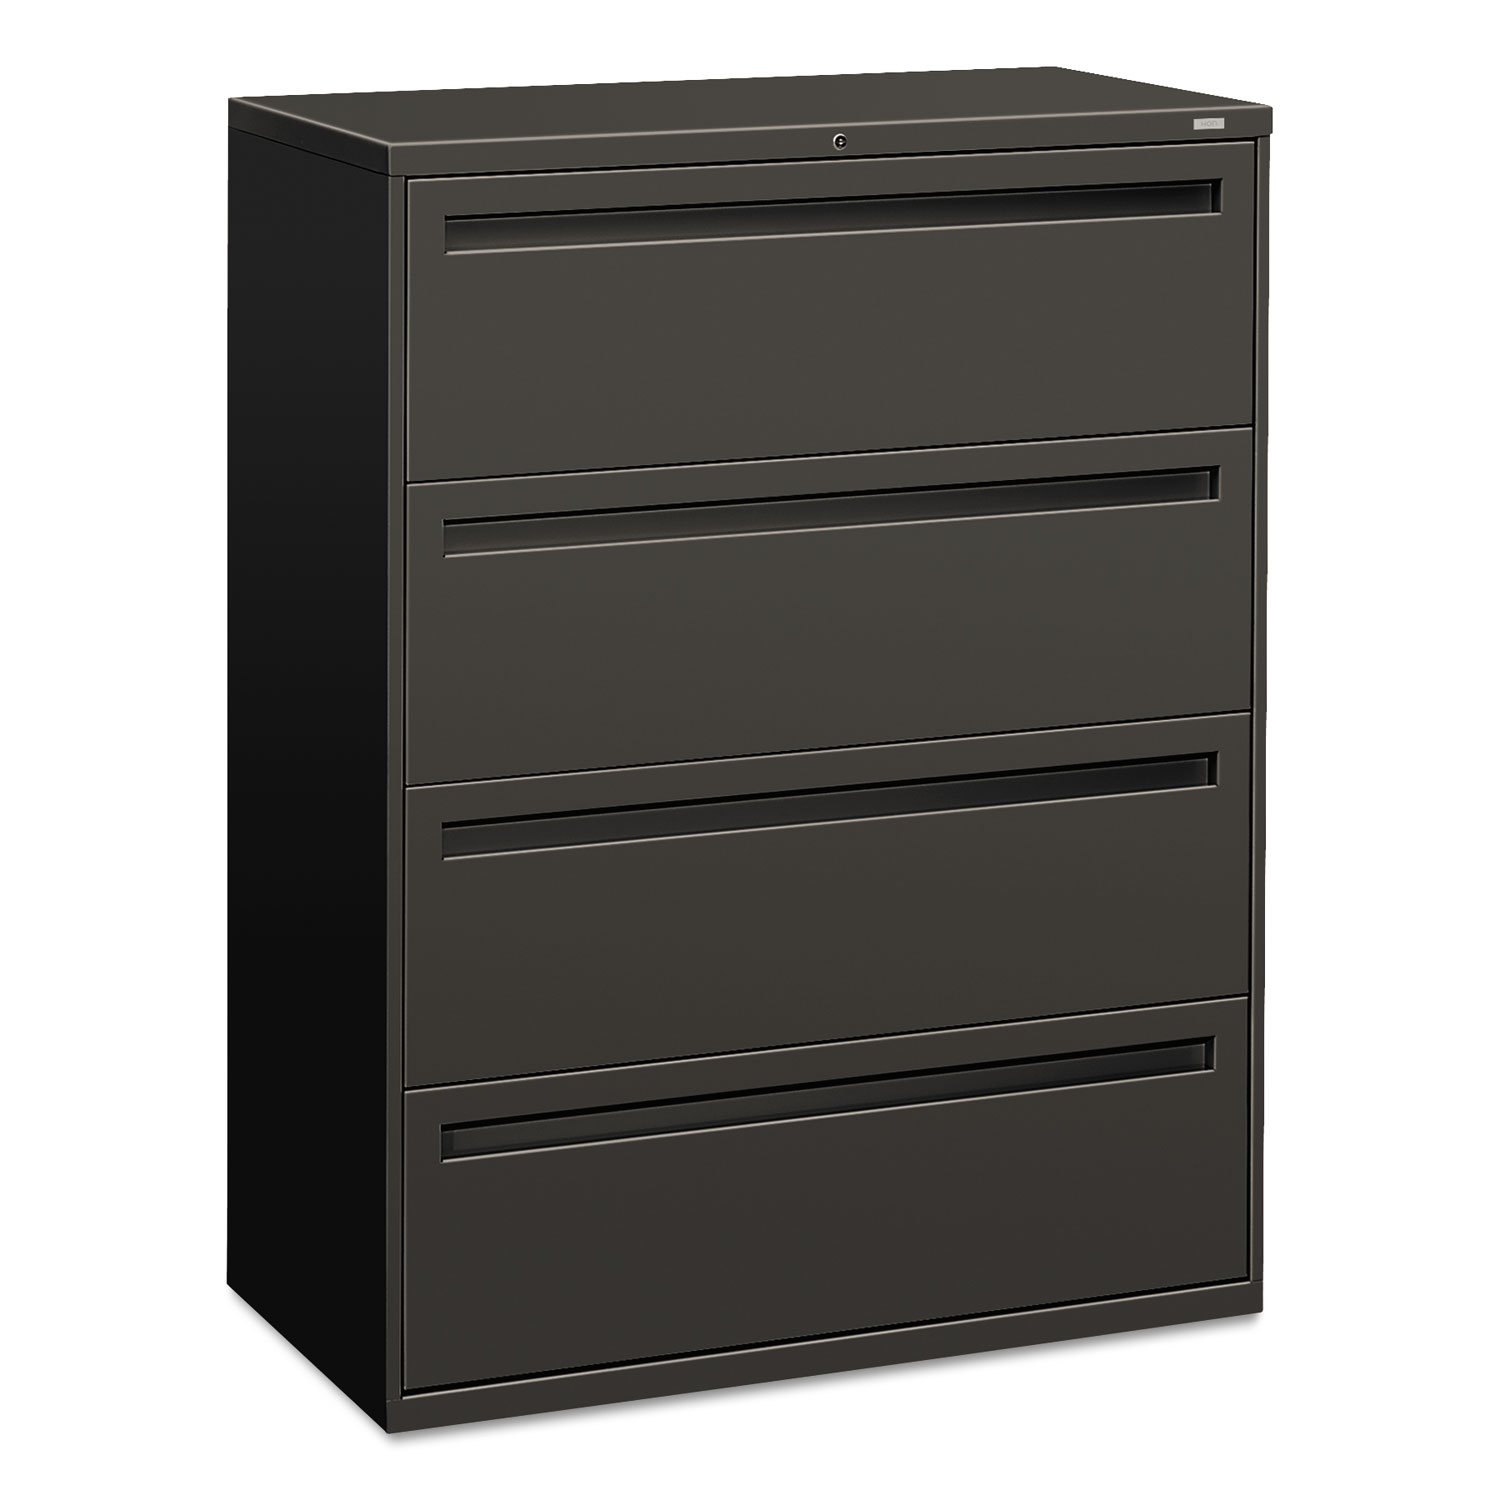 HON 700 Series Four-Drawer Lateral File, 42w x 19-1/4d, Charcoal